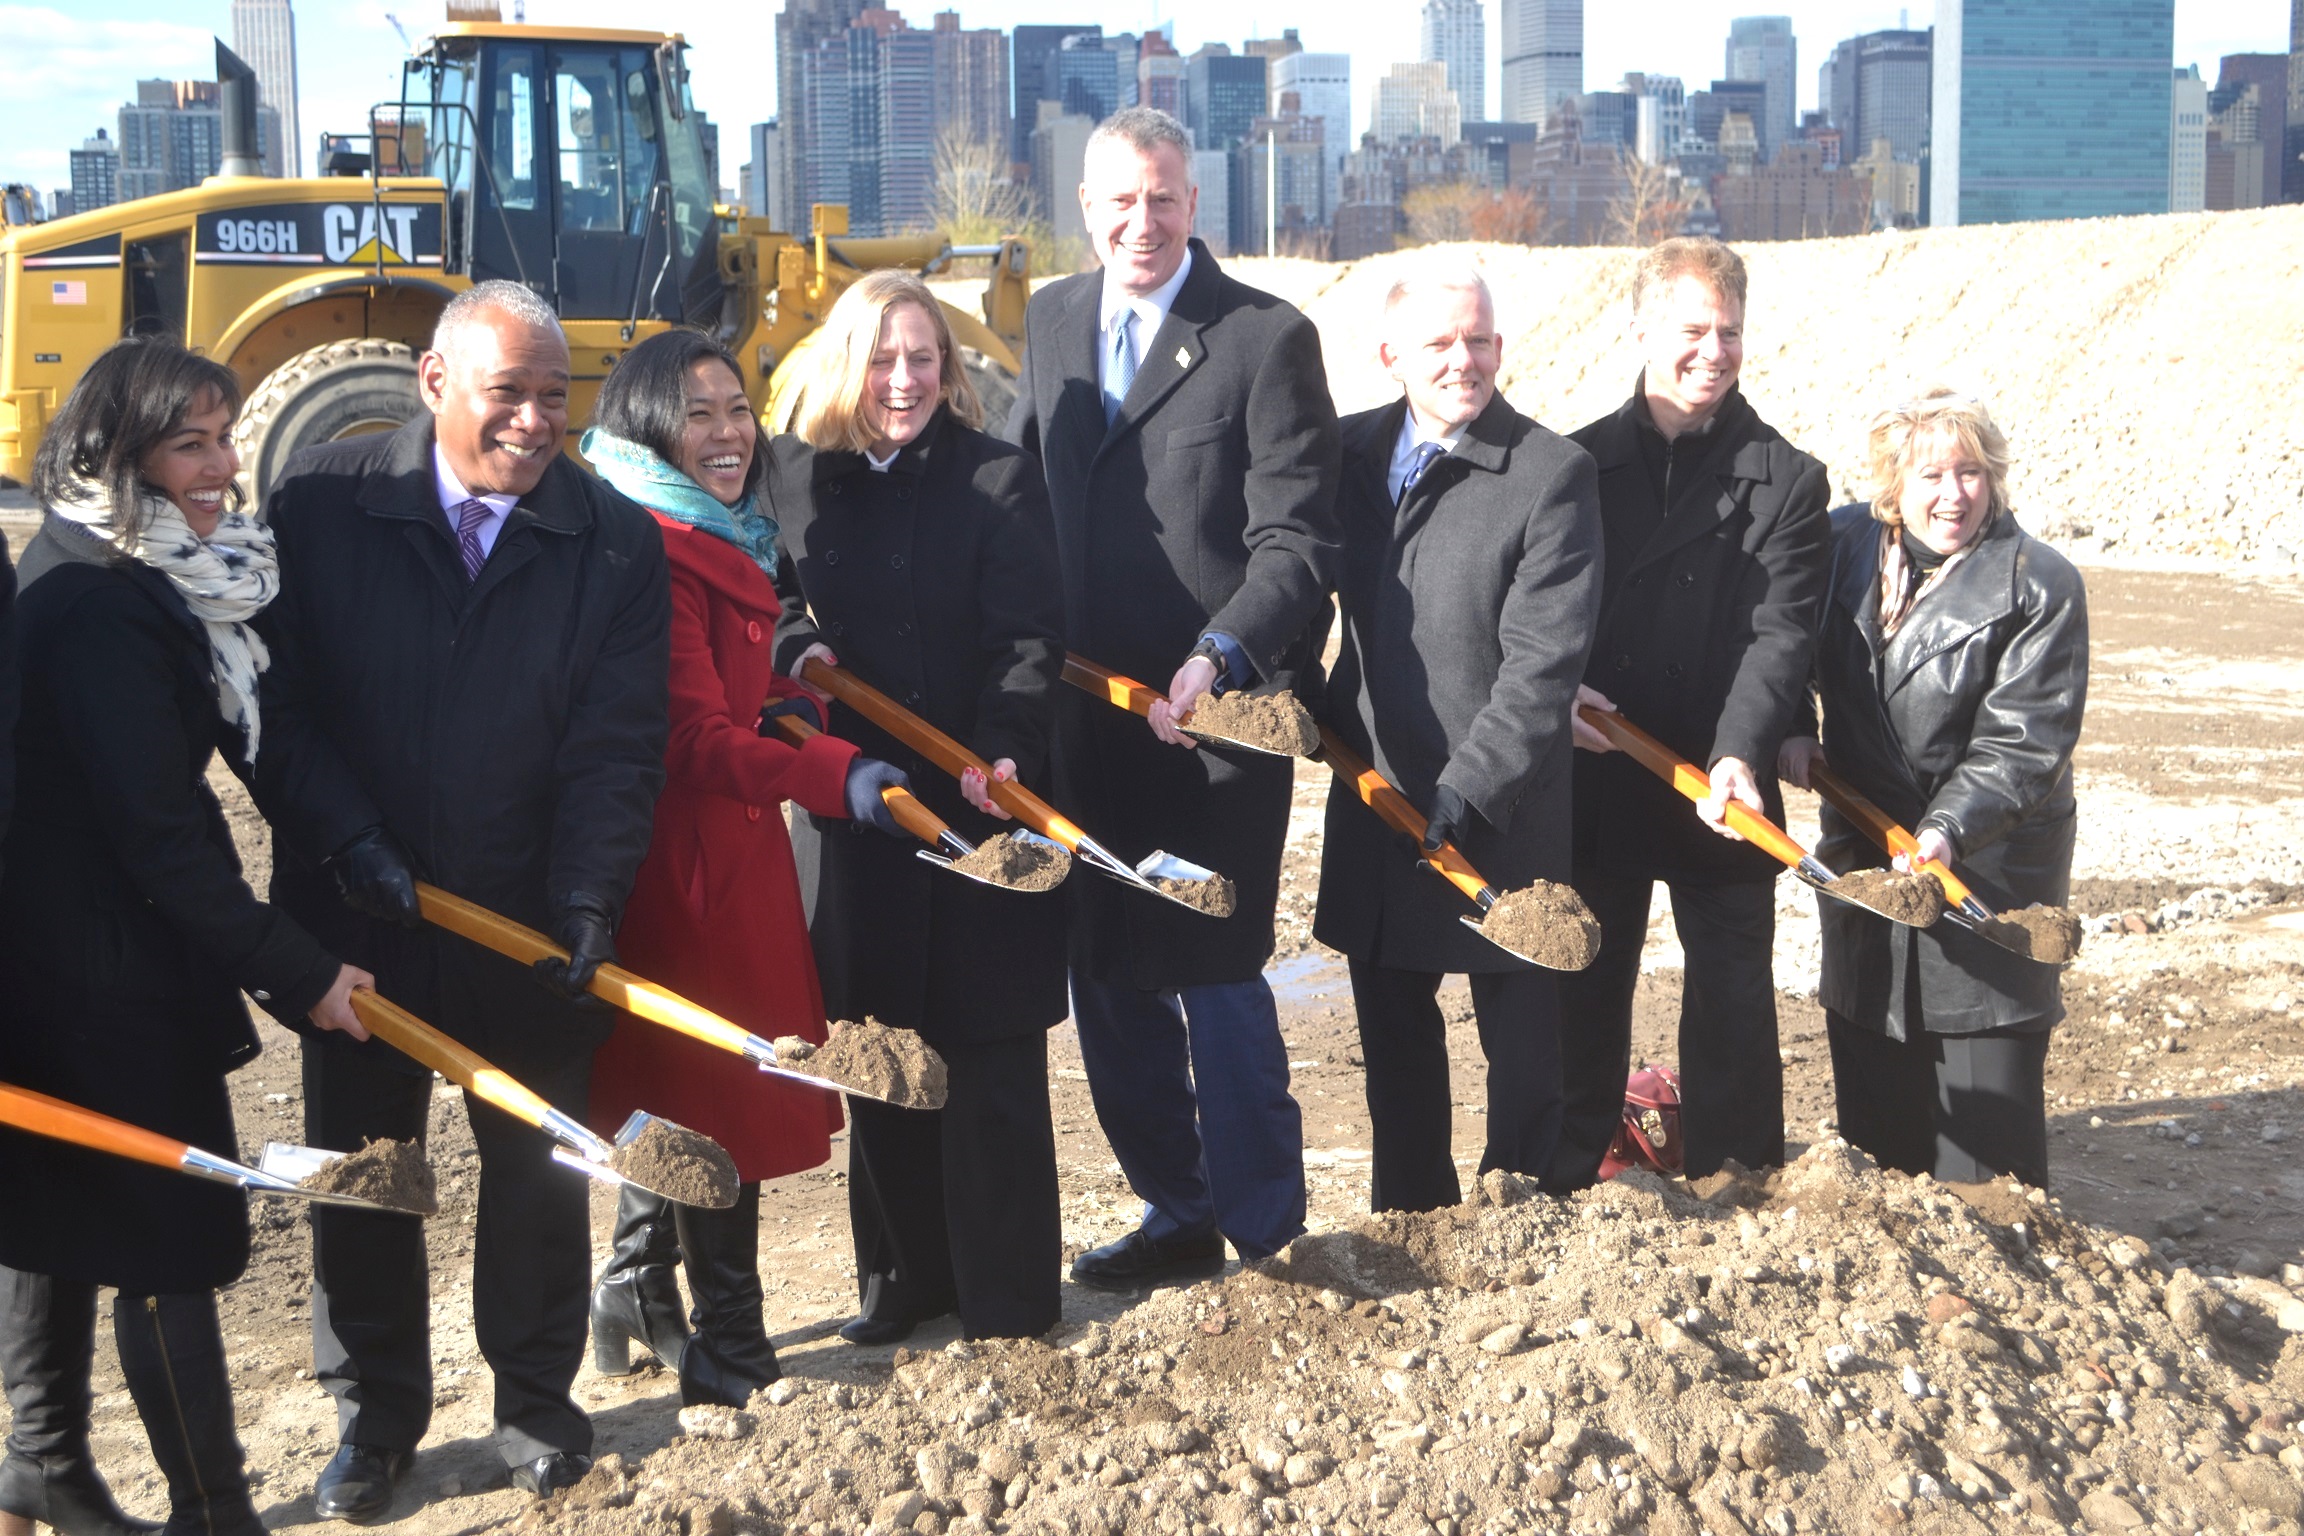 Mayor Bill de Blasio and other elected officials took part in a groundbreaking ceremony for the second phase of Hunters Point South construction in Long Island City.